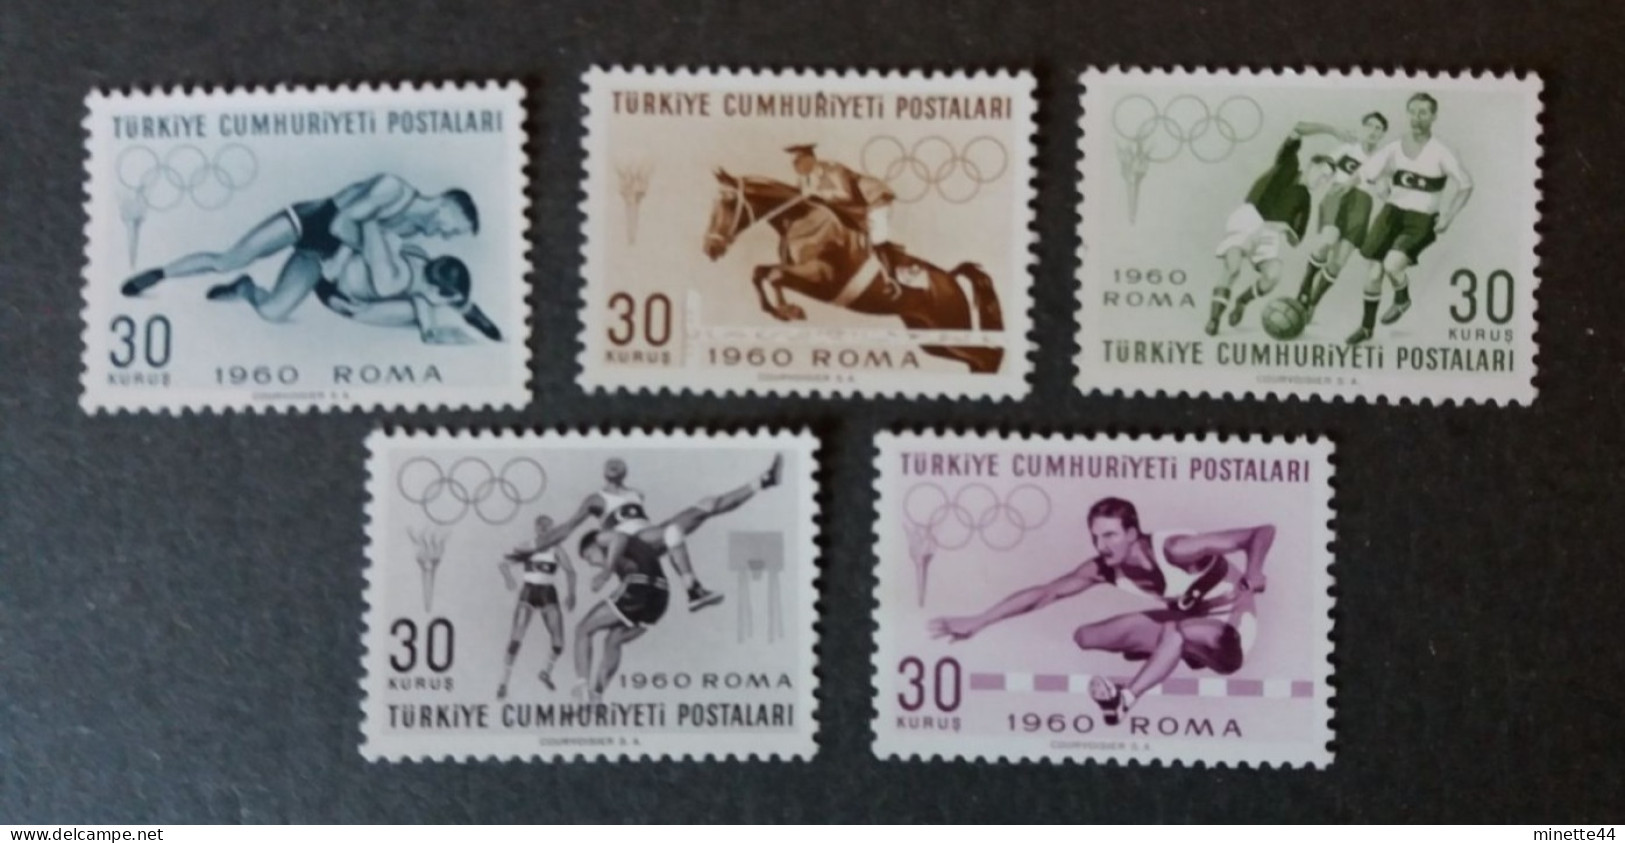 TURQUIE TURKEY 1960 MNH**  GAMES JEUX LUTTE JUMPING ATHLETISME  BASKET FOOTBALL SPORTS - Ete 1960: Rome